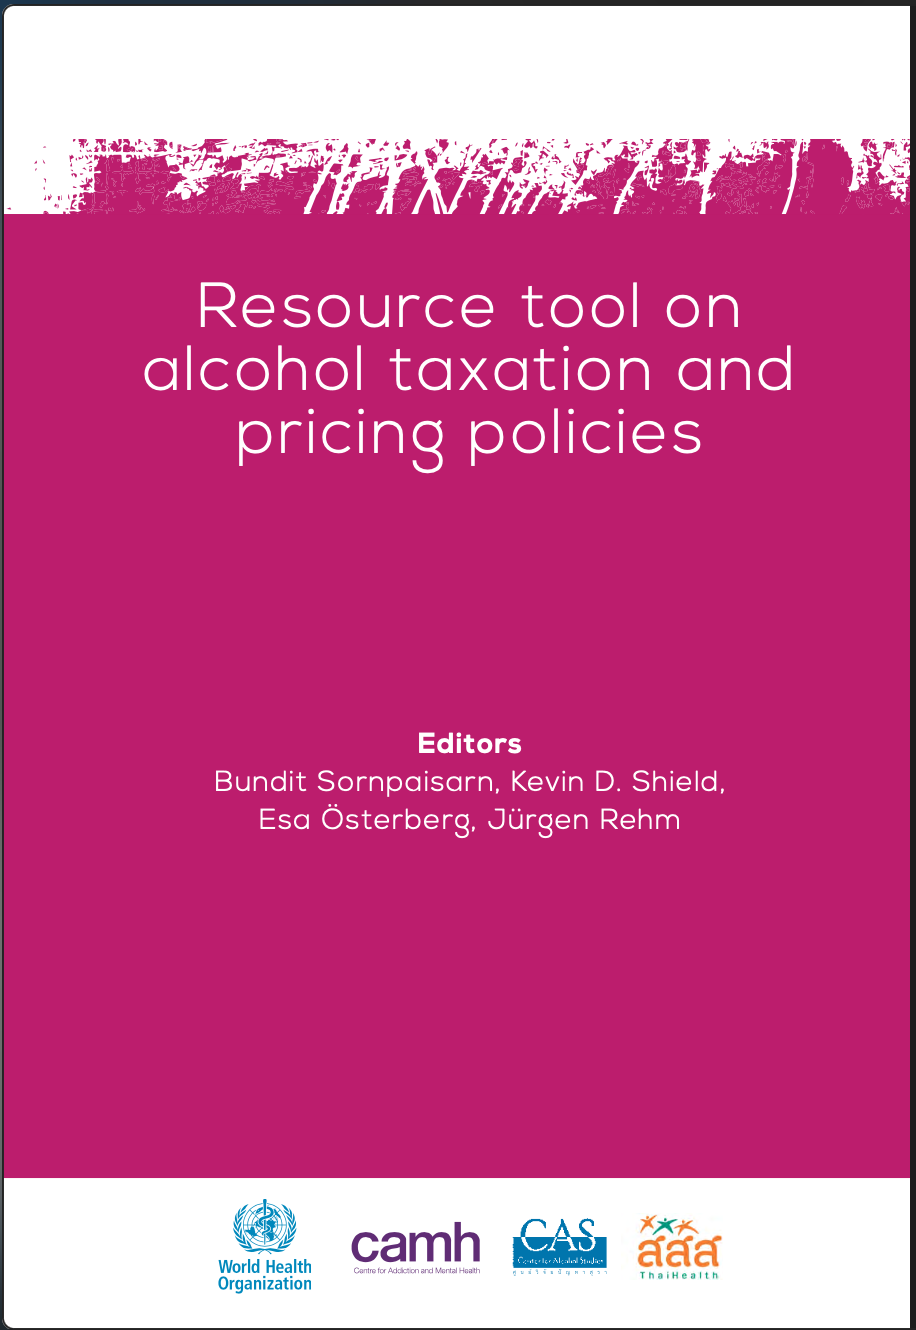 Resource Tool on Alcohol Taxation and Pricing Policies (WHO 2017)